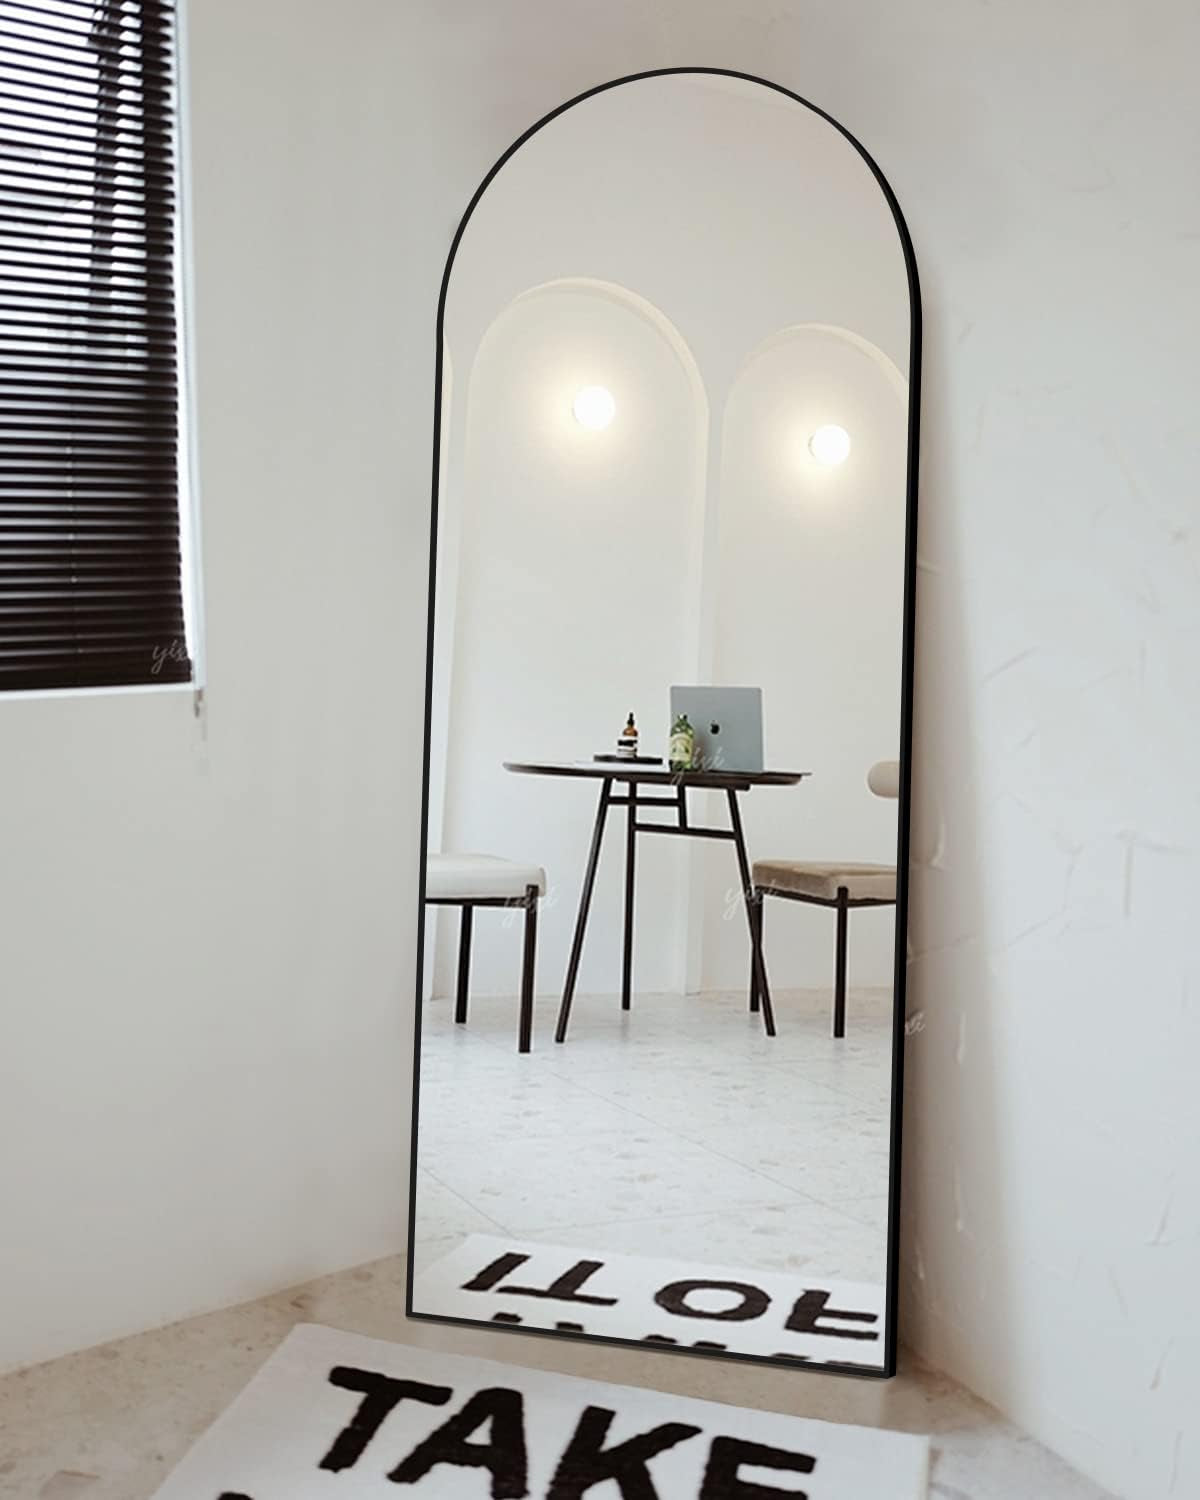 Floor Mirror, Full Length Mirror with Stand, Arched Wall Mirror, Mirror Full Length, Black Floor Mirror Freestanding, Wall Mounted Mirror for Bedroom Living Room, Black